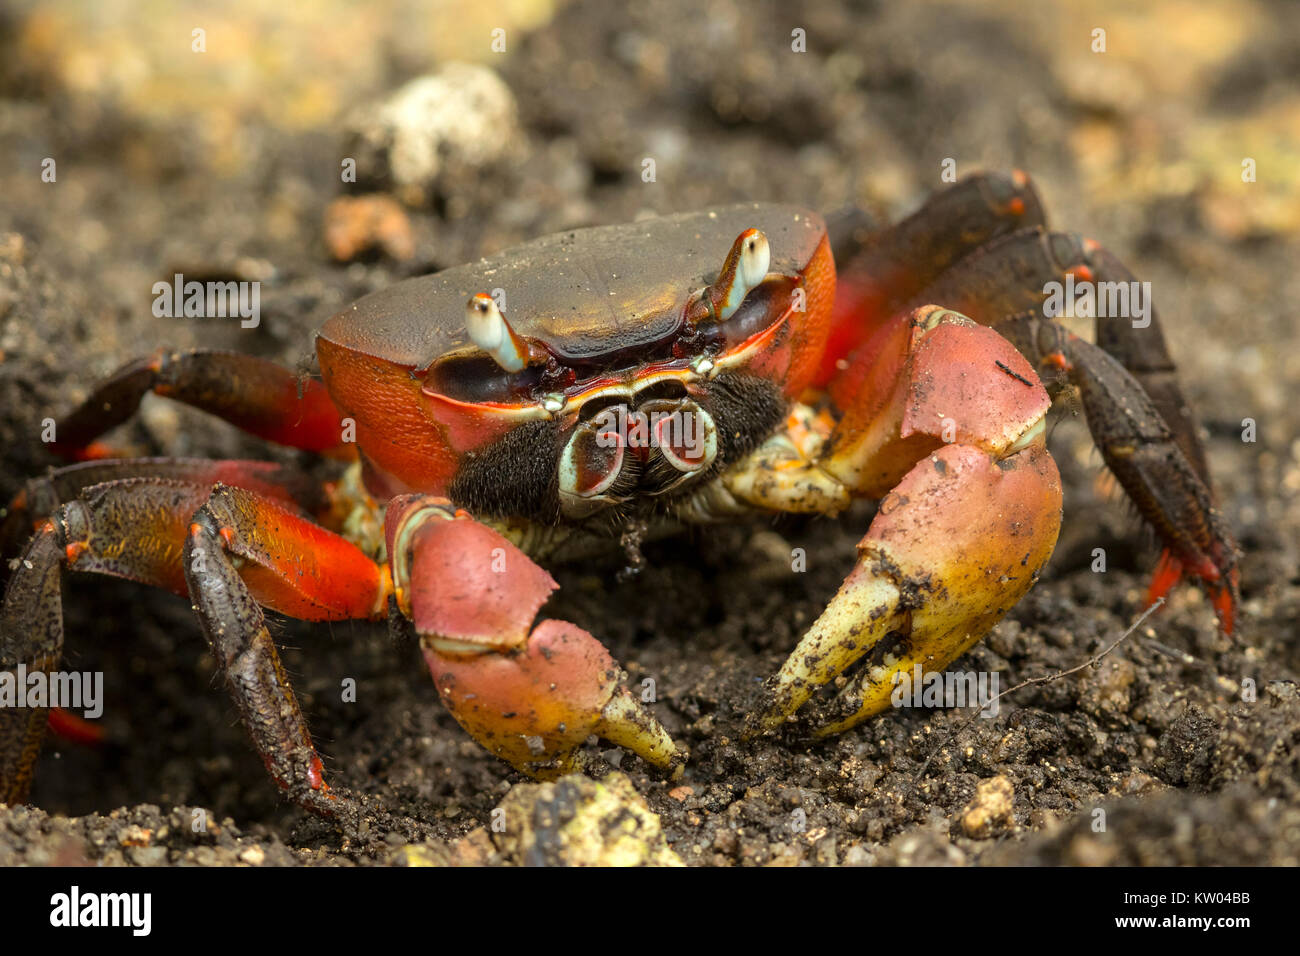 Terre brune (Cardisoma carnifex) Crabe, crabe Gecarcinidae, châtaigne, Red-griffe crabe Banque D'Images